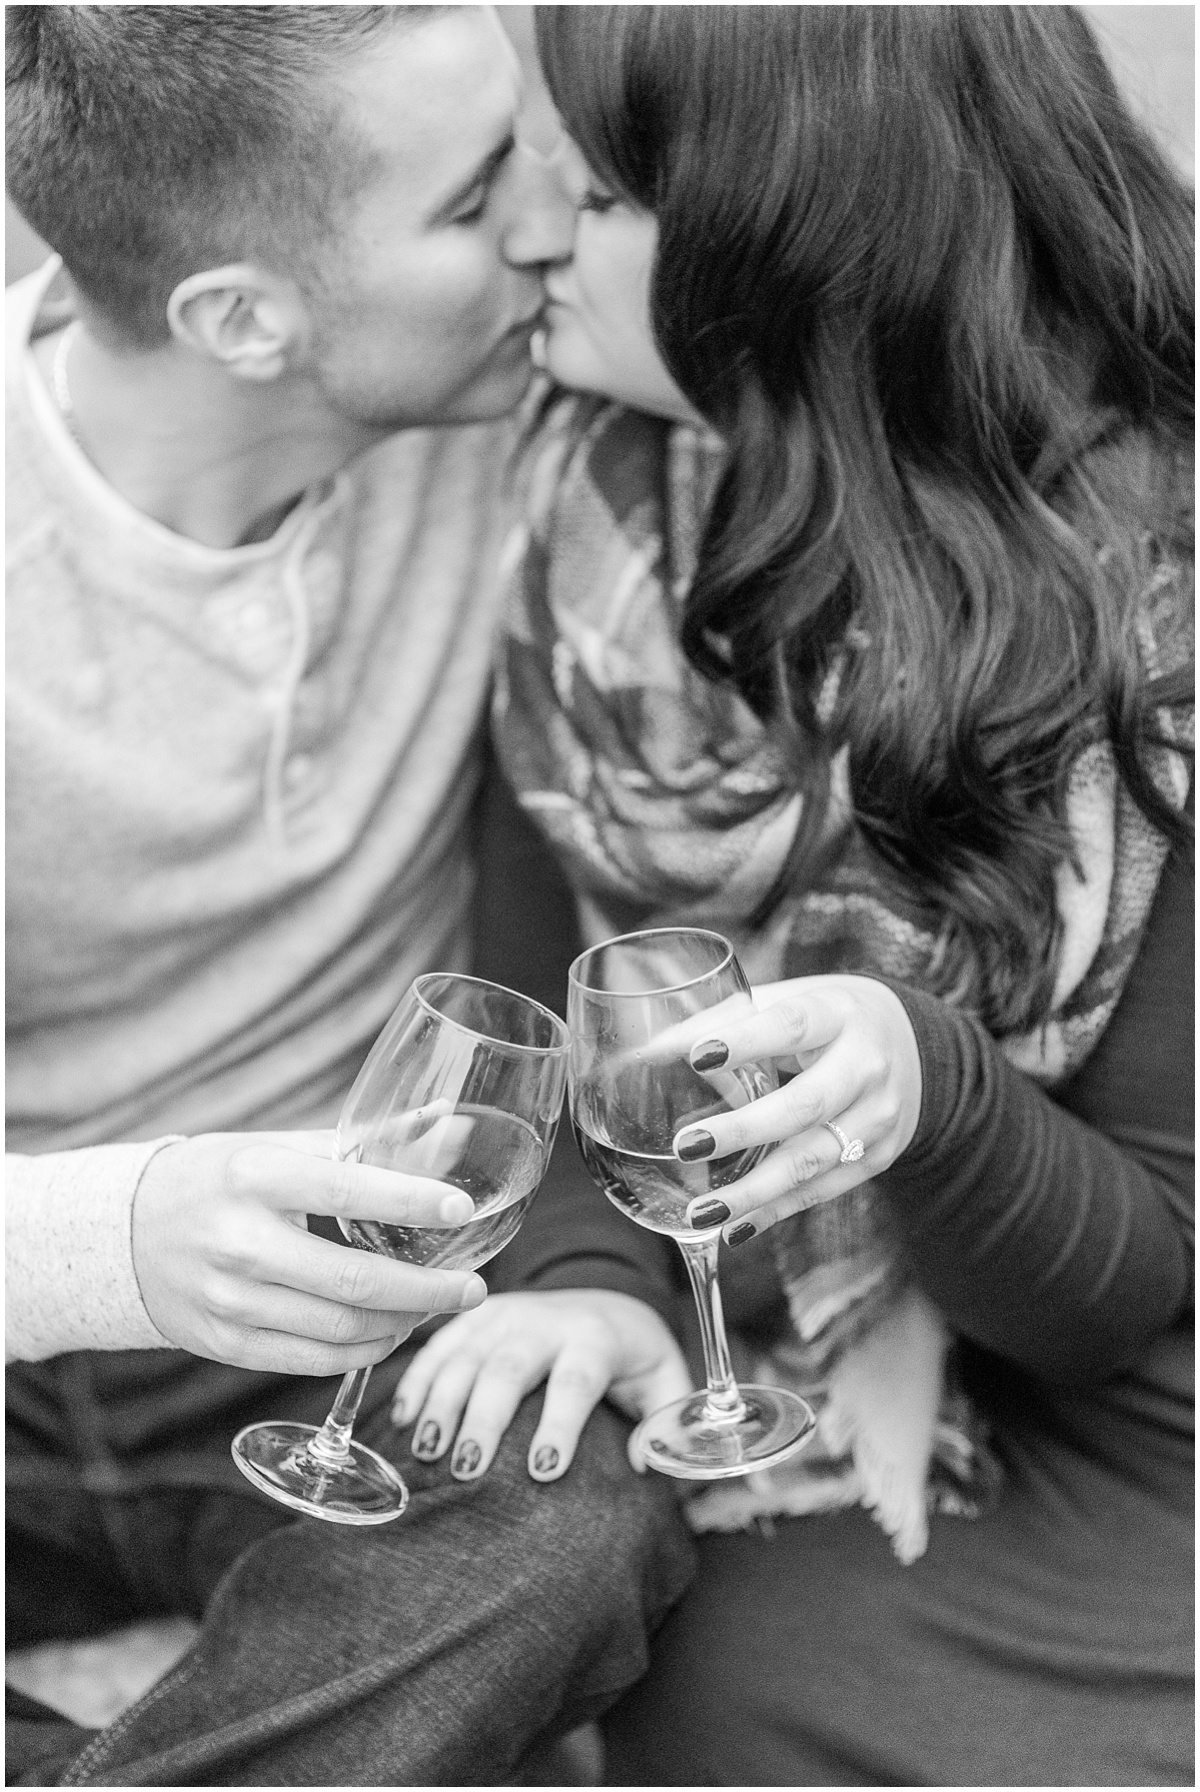 Bride to be kissing her fiance while holding wine glasses